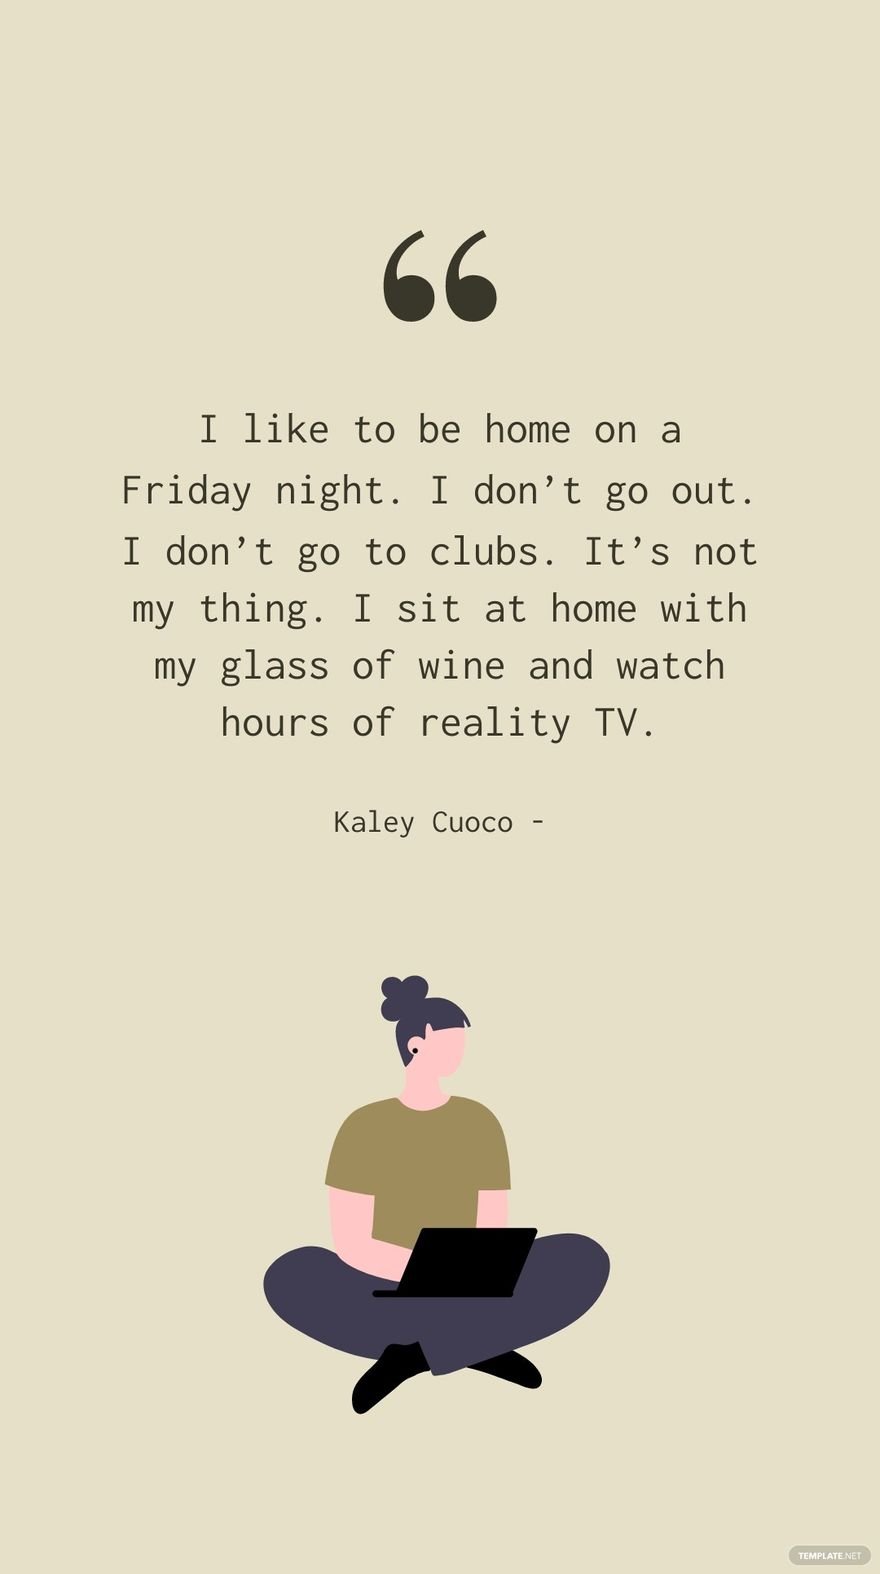 Kaley Cuoco - I like to be home on a Friday night. I don’t go out. I don’t go to clubs. It’s not my thing. I sit at home with my glass of wine and watch hours of reality TV.